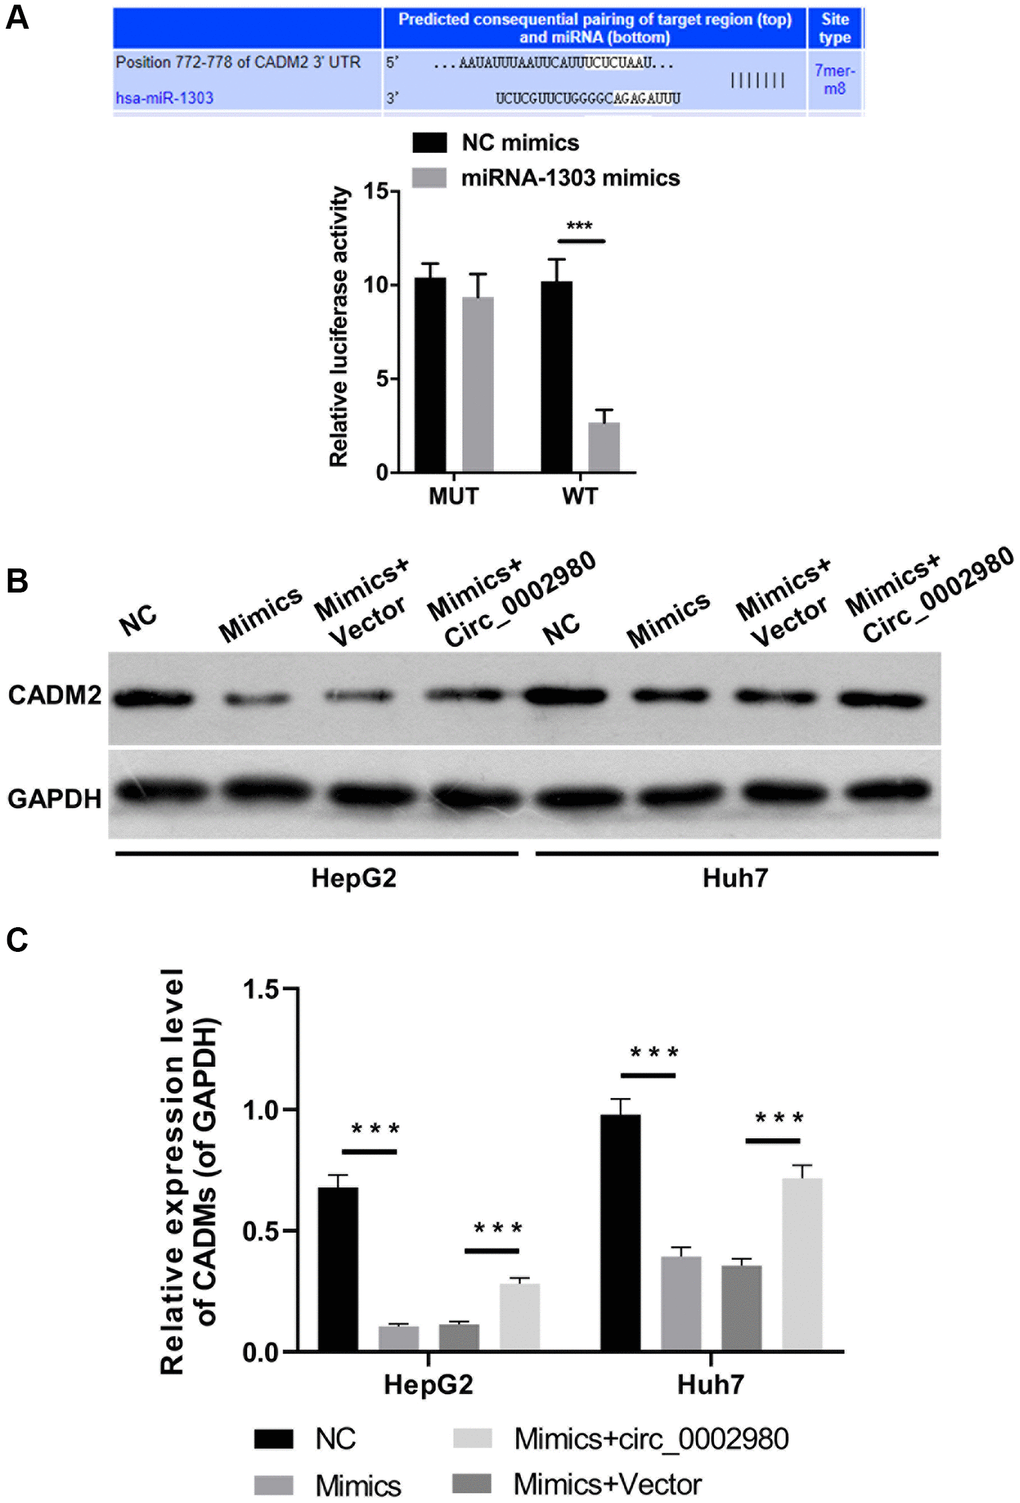 CADM2 was a target gene of miR-1303. (A) TargetScan analysis was applied to predict the binding site between miR-1303 and CADM2, and the targeting effect of miR-1303 to CADM2 was confirmed using dual luciferase reporter assay. (B) Western blotting analysis of CADM2 expression in HepG2 and Huh7 cells, which were administrated with miR-1303 mimics and circ